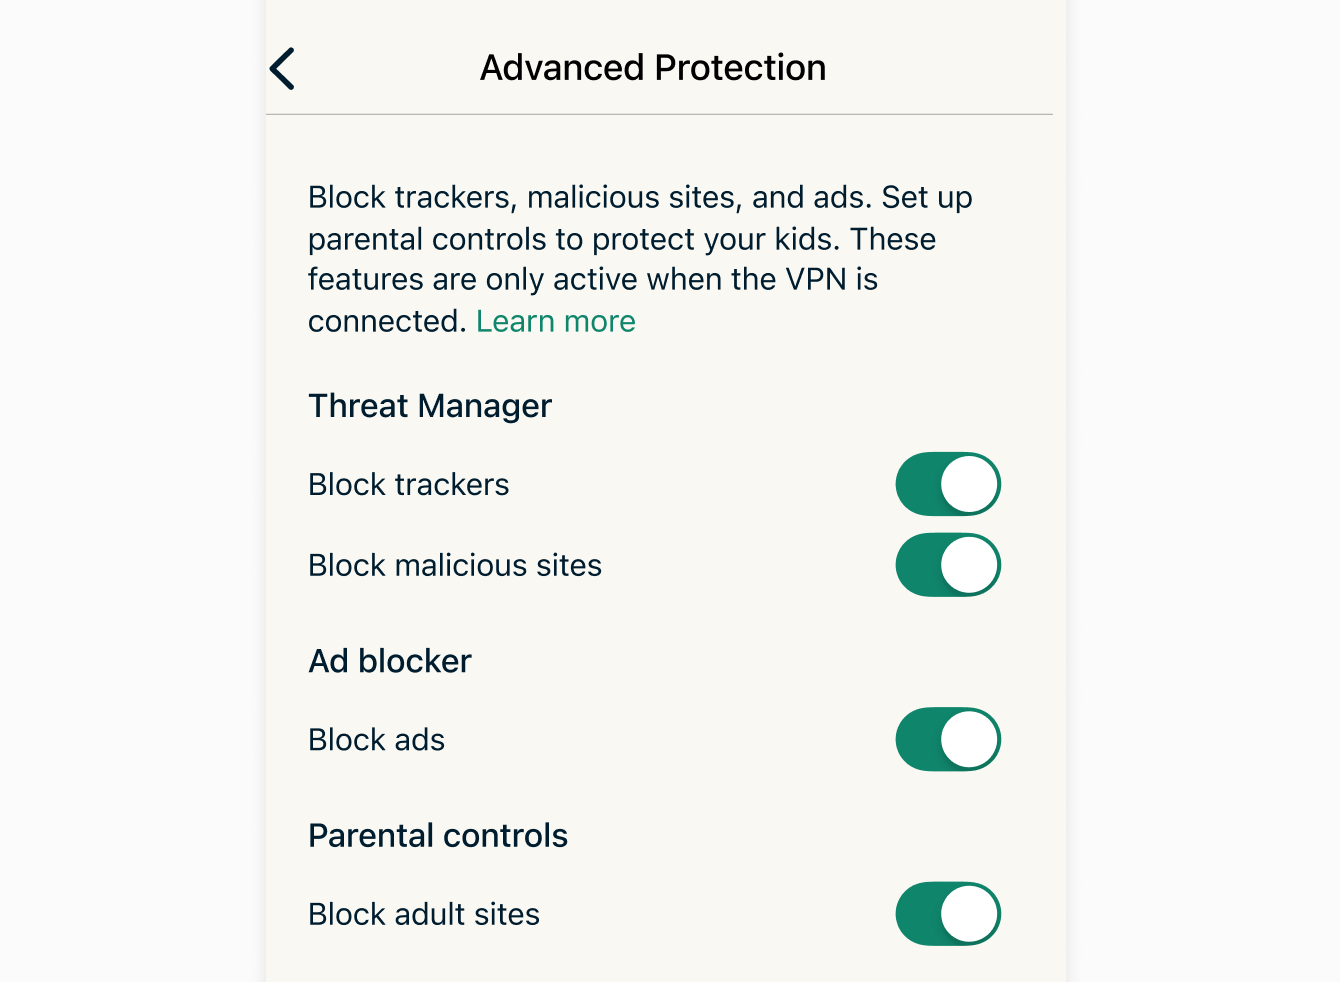 Advanced Protection settings on the ExpressVPN app for iOS.